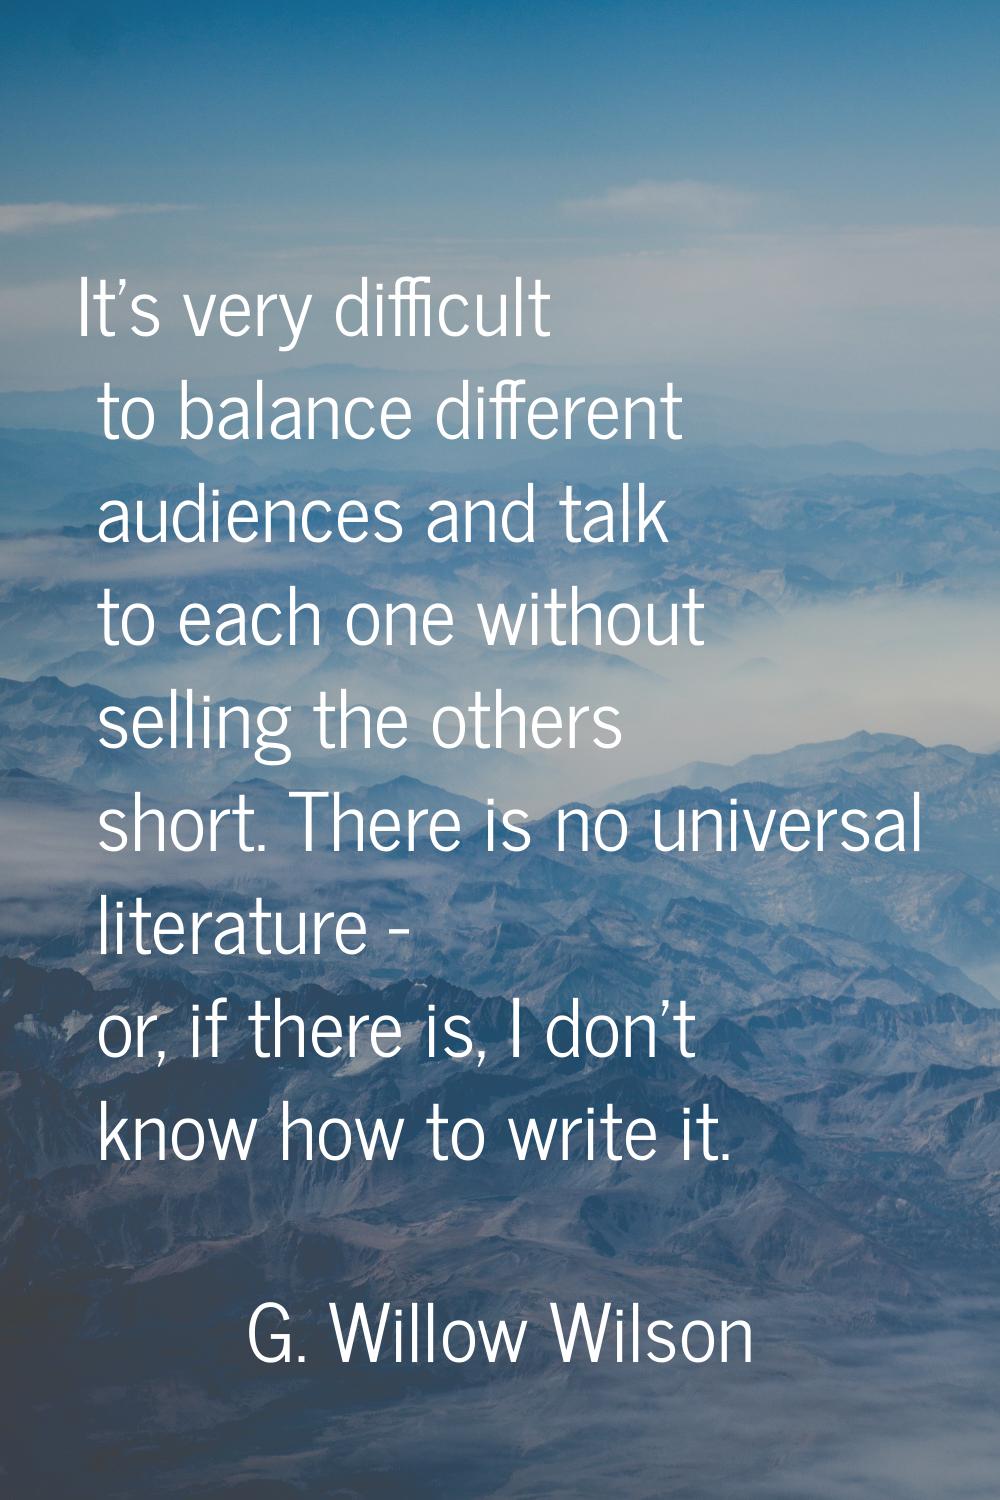 It's very difficult to balance different audiences and talk to each one without selling the others 